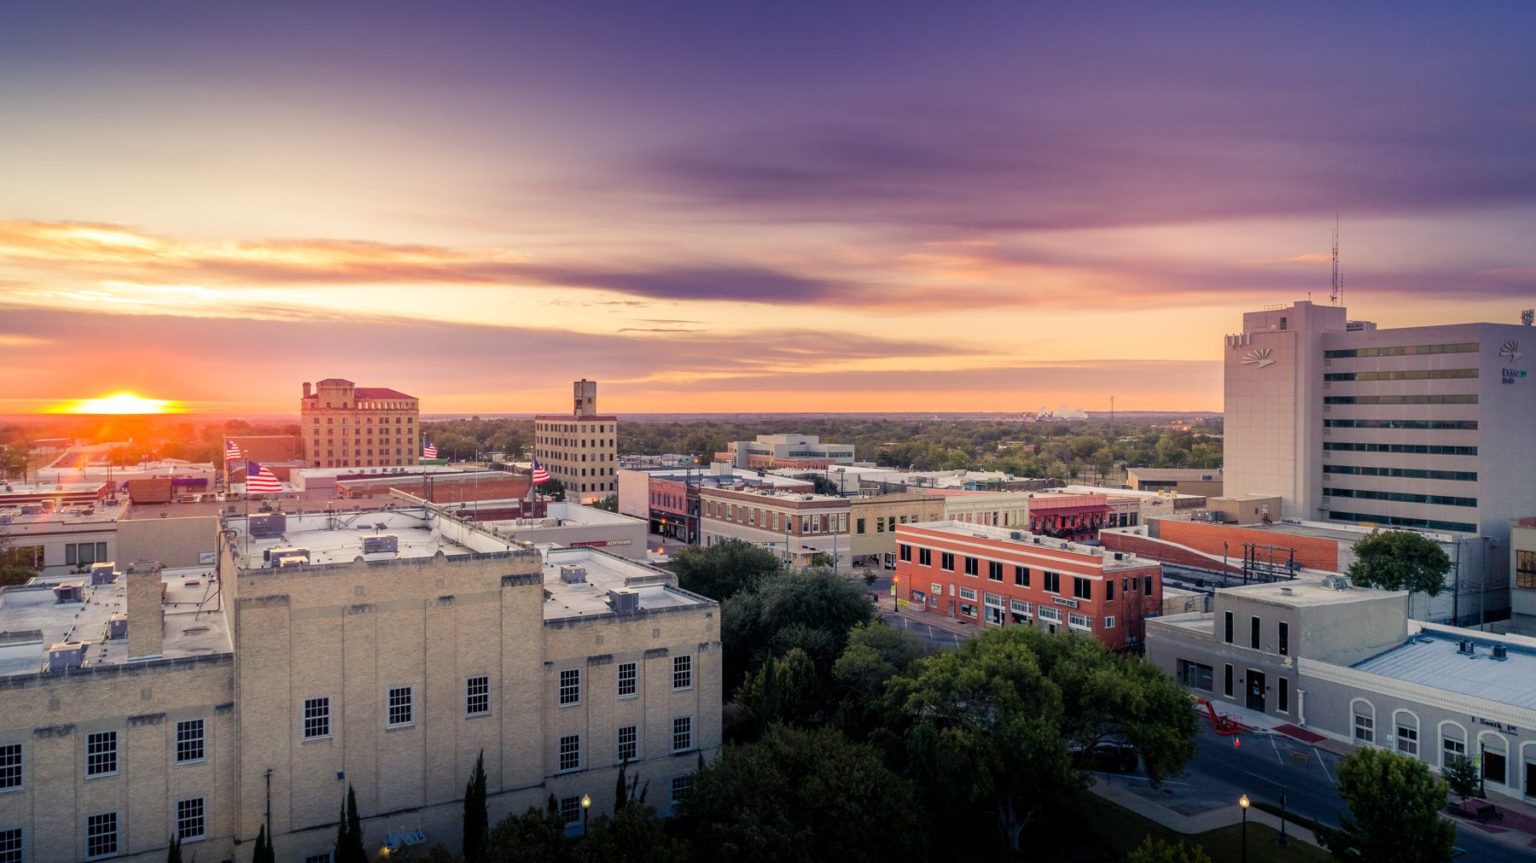 An aerial shot of Temple, Texas at sunset